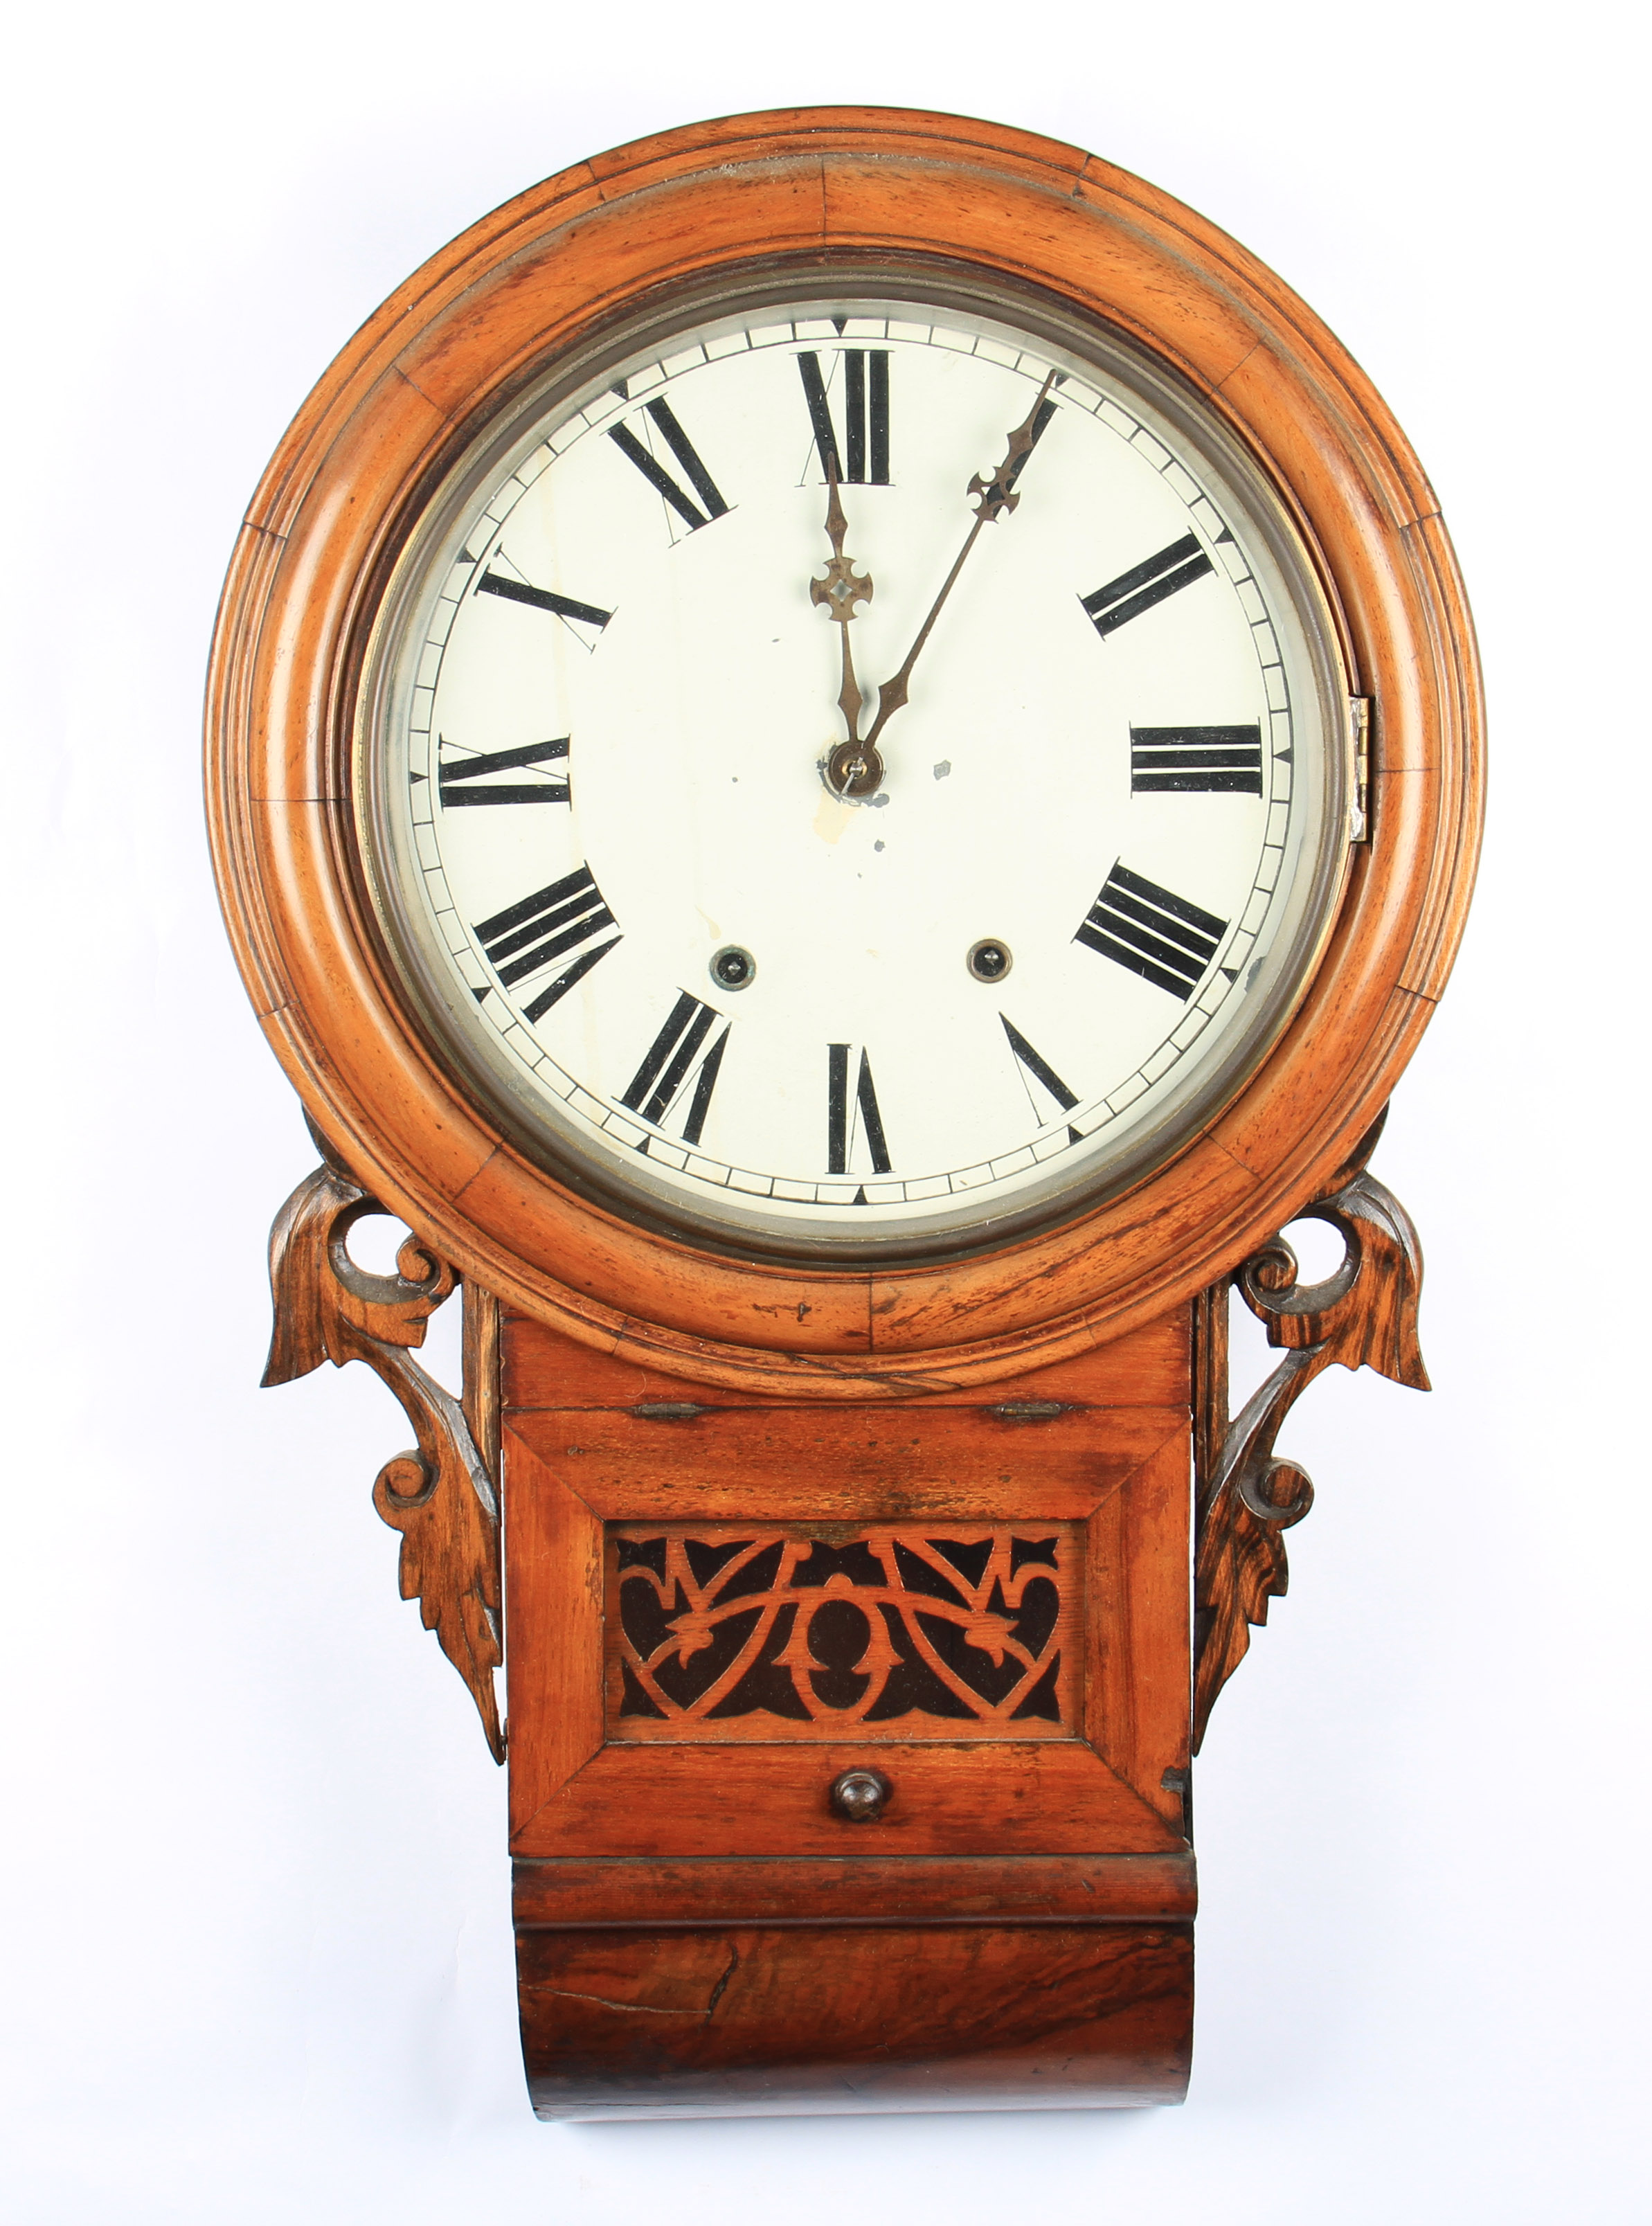 A Victorian mahogany American style hanging wall clock with carved sides and front window, the white